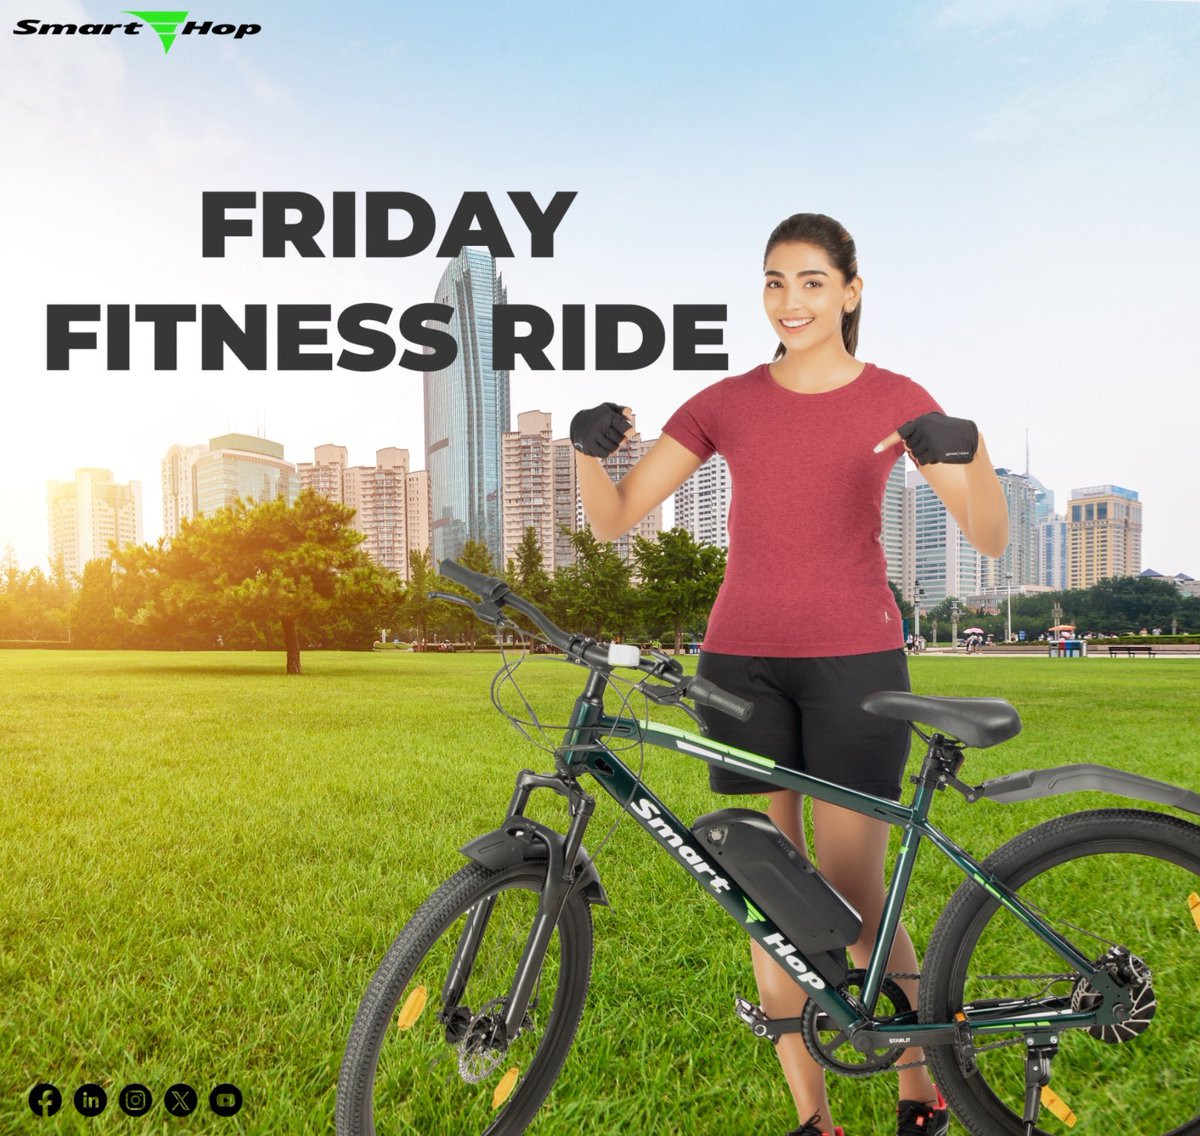 Break a sweat with SmartEHop! Share your cycling workout routines and embrace a fit and active lifestyle. Let's pedal towards a healthier you!

#SmartFitness #FridayMotivation #smartehop #nammachennai #madeinchennai #chennaicycling #chennai #madeinindia #weekendvibes